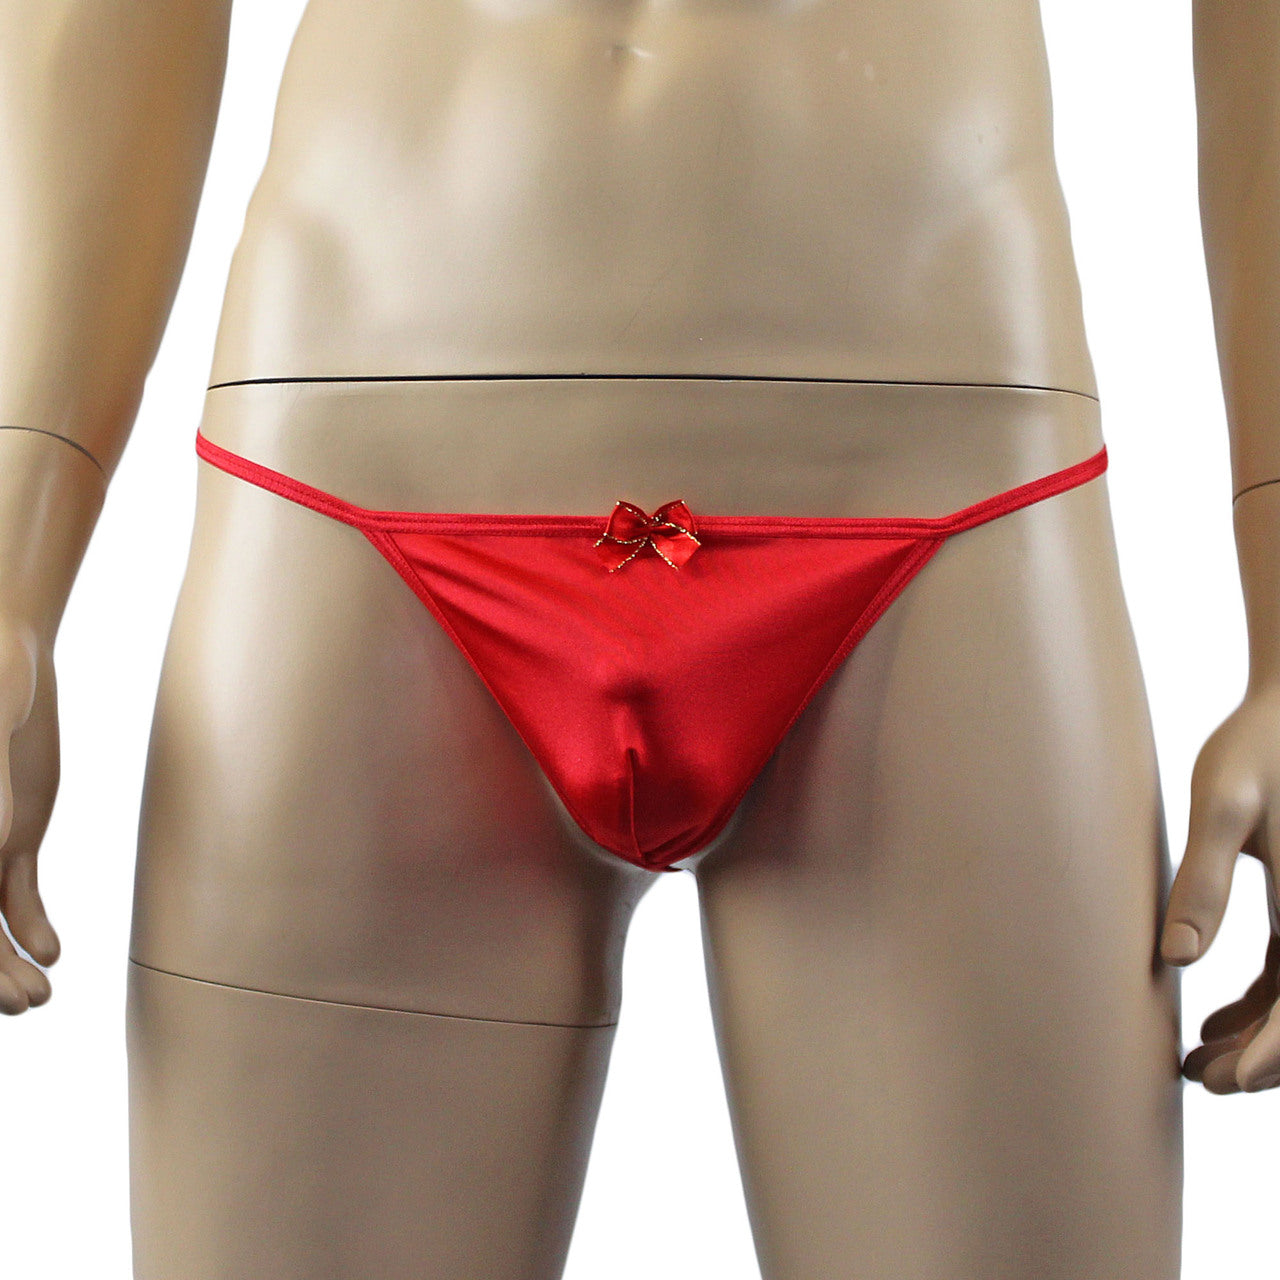 Mens Xmas Stretch Spandex Pouch G string with Red & Gold Bow